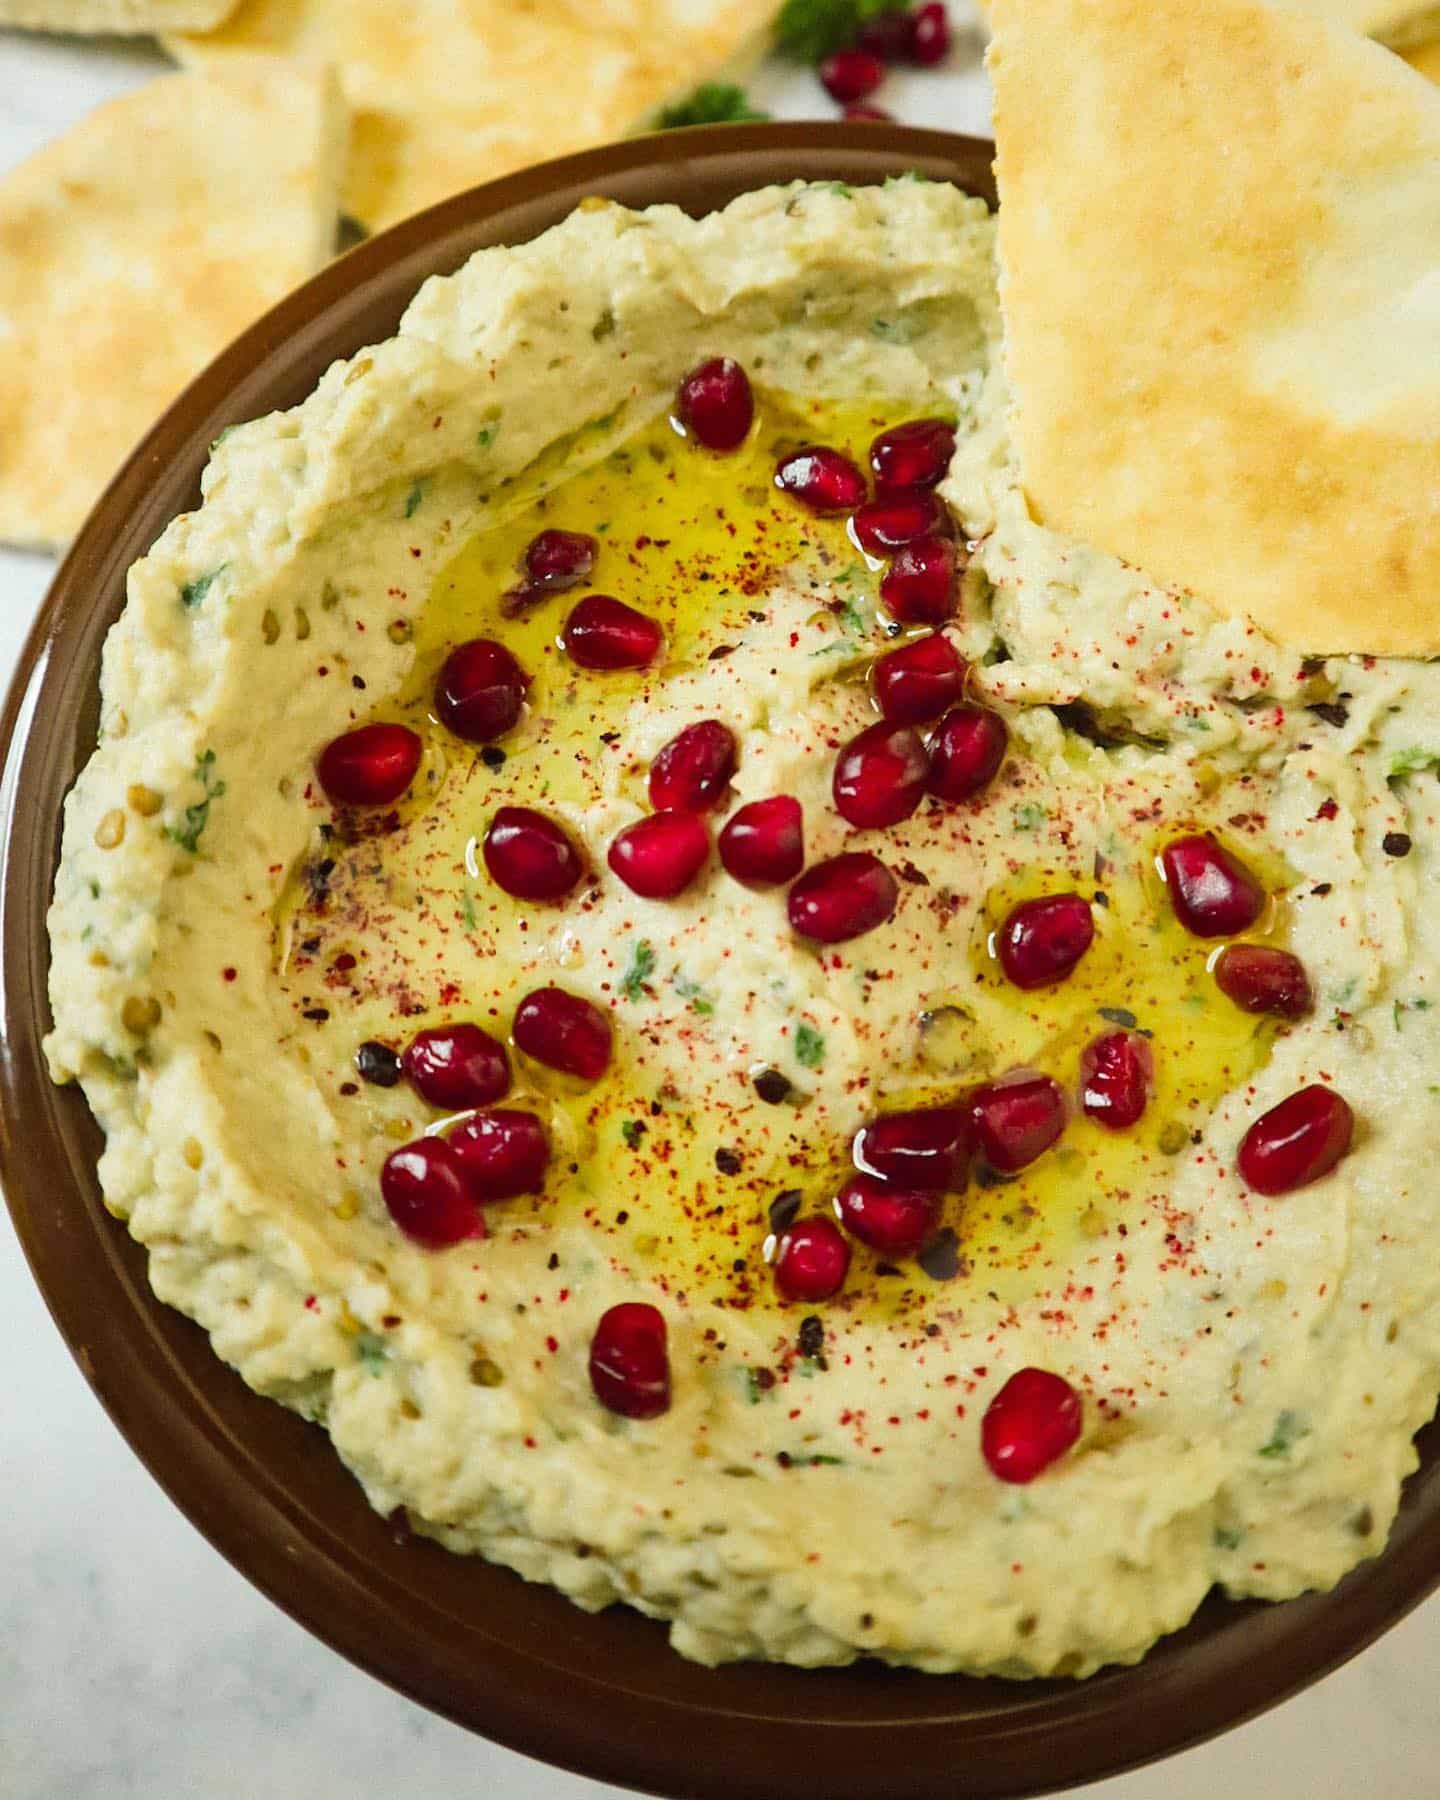 The Best Authentic Baba Ganoush is one of my favorite dips 😍. It’s smokey, creamy, savory and vegan!

-This recipe is made from simple ingredients and easy to make 😋

🔥Check out the recipe and let me know what you think 🙂. 

*Want the recipe? Tap @eatenjoybyraneem and click the link in my profile description below the pic.

.
.
.
.
.
.

#babaganoush #healthy #falafel #food #vegan #feedfeed #todayfood #buzzfeedfood #f52grams #tastykitchen #lebanesefood #foodie #foodporn #middleeasternfood #eggplant #tahini #instafood #shawarma #instagood #isntaphoto #kafta #kebab #vegetarian #mezze #arabe #yummy #kebablovers #bhfyp